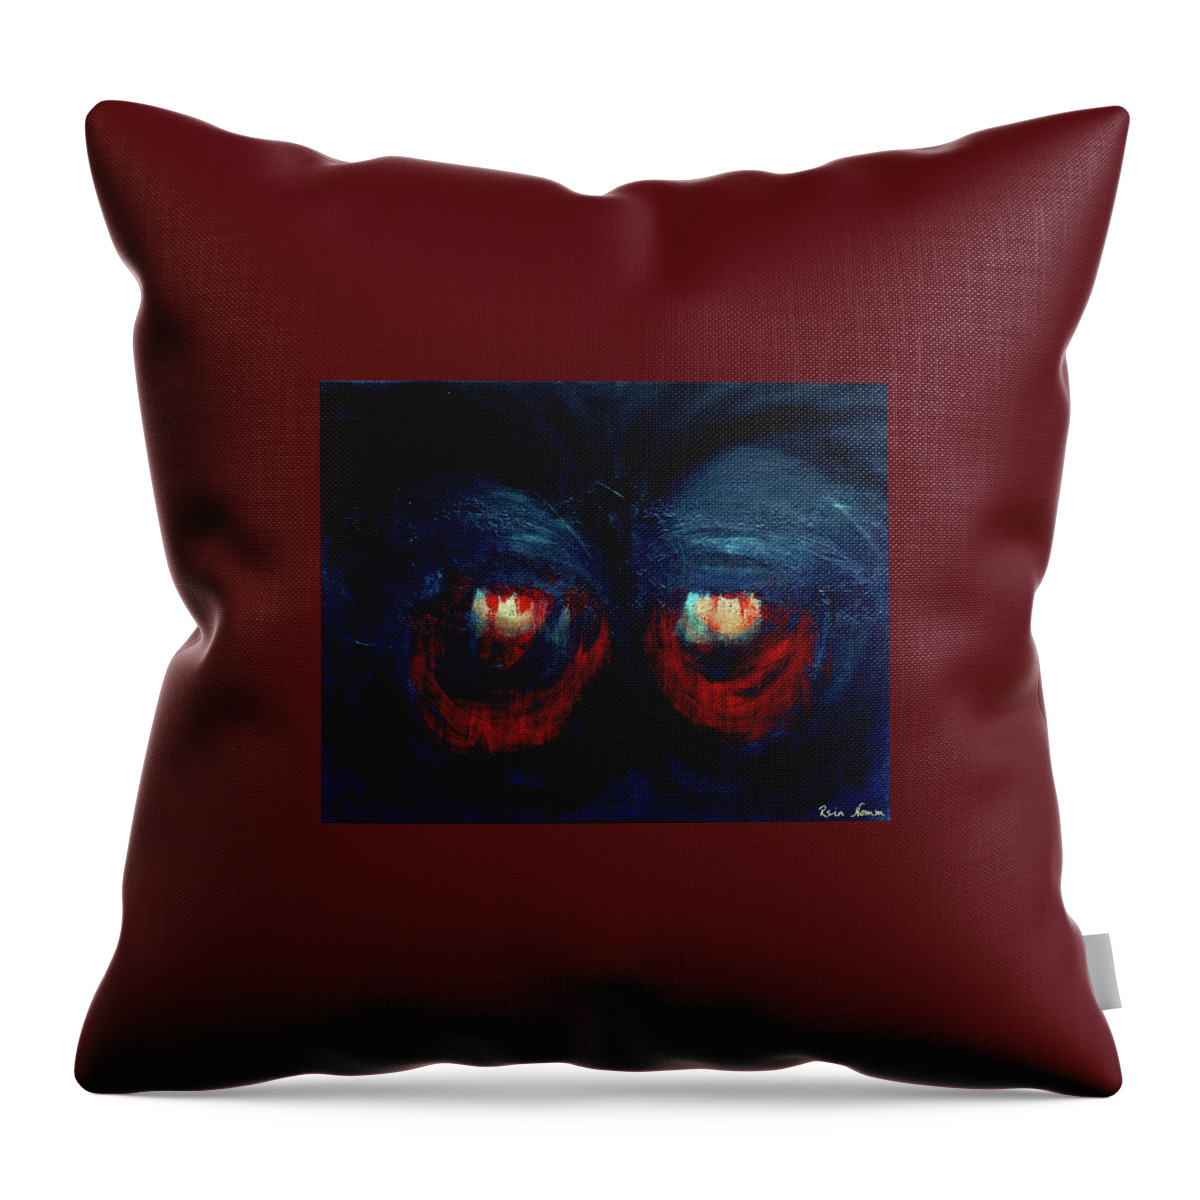  Throw Pillow featuring the painting The Eyes of Terror by Rein Nomm